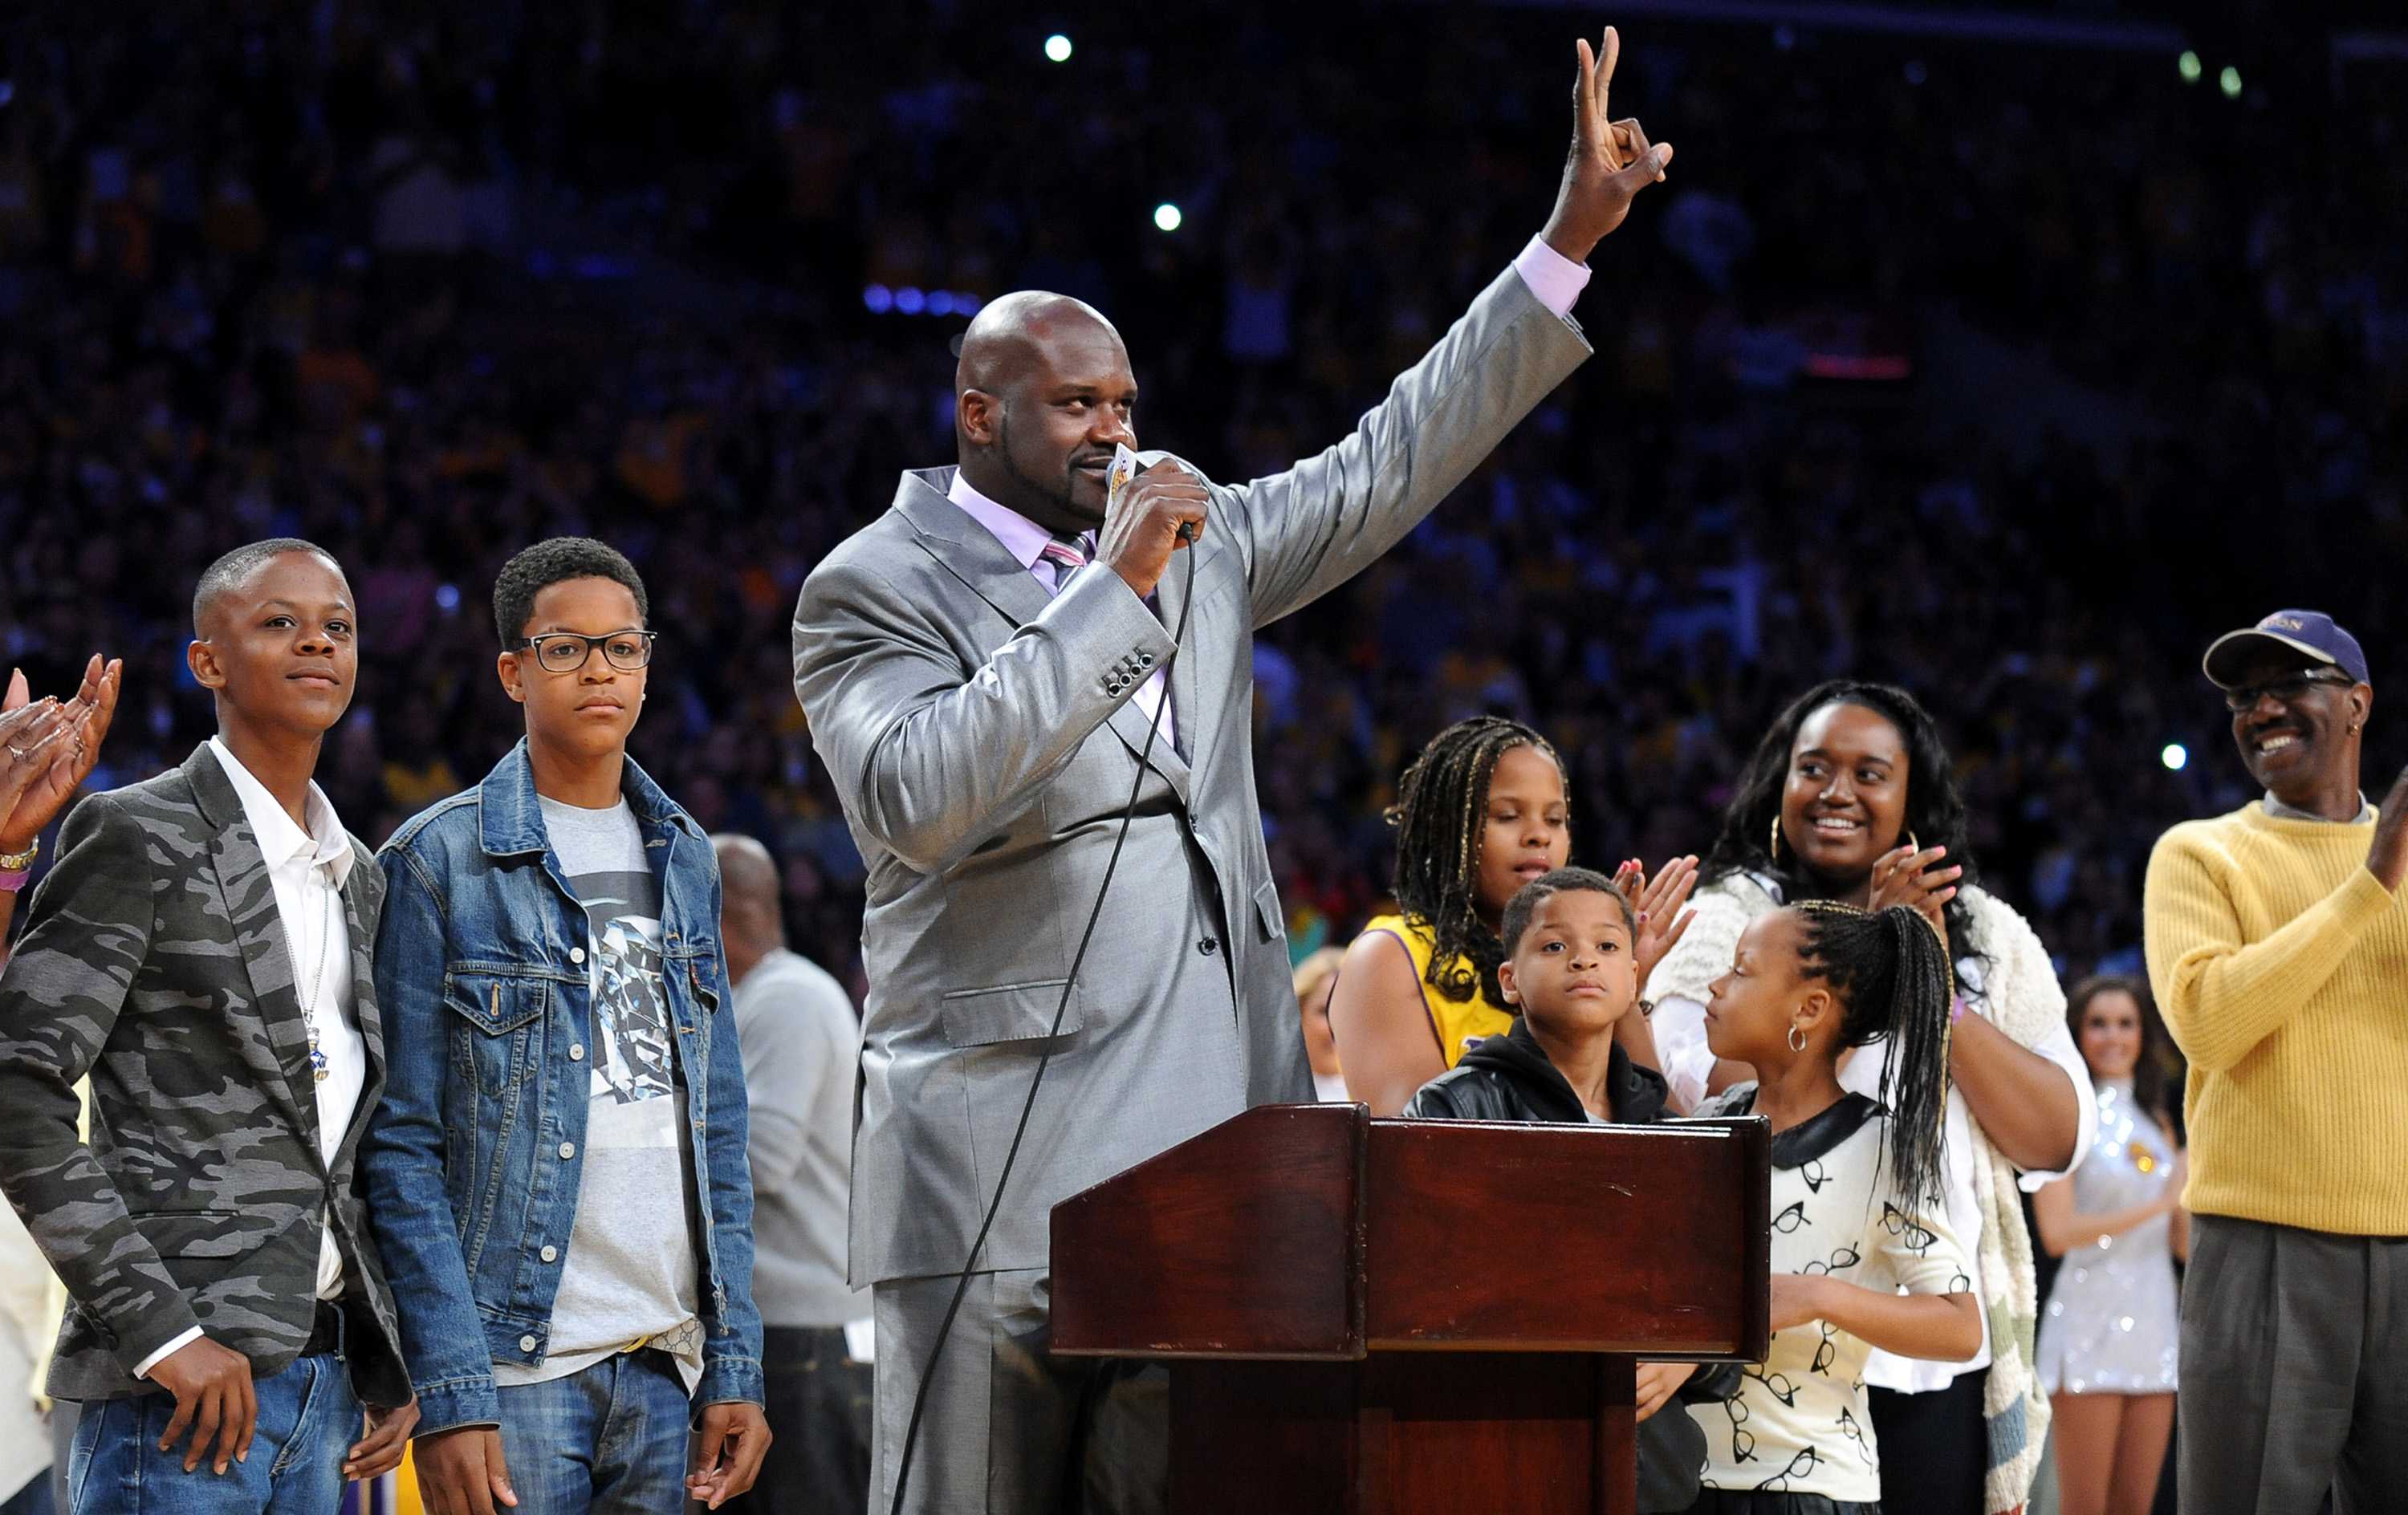 Former Los Angeles Lakers star Shaquille O'Neal during a ceremony to retire his number before a game against the Dallas Mavericks at Staples Center in Los Angeles, California, on Tuesday, April 2, 2013. (Wally Skalij/Los Angeles Times/MCT)